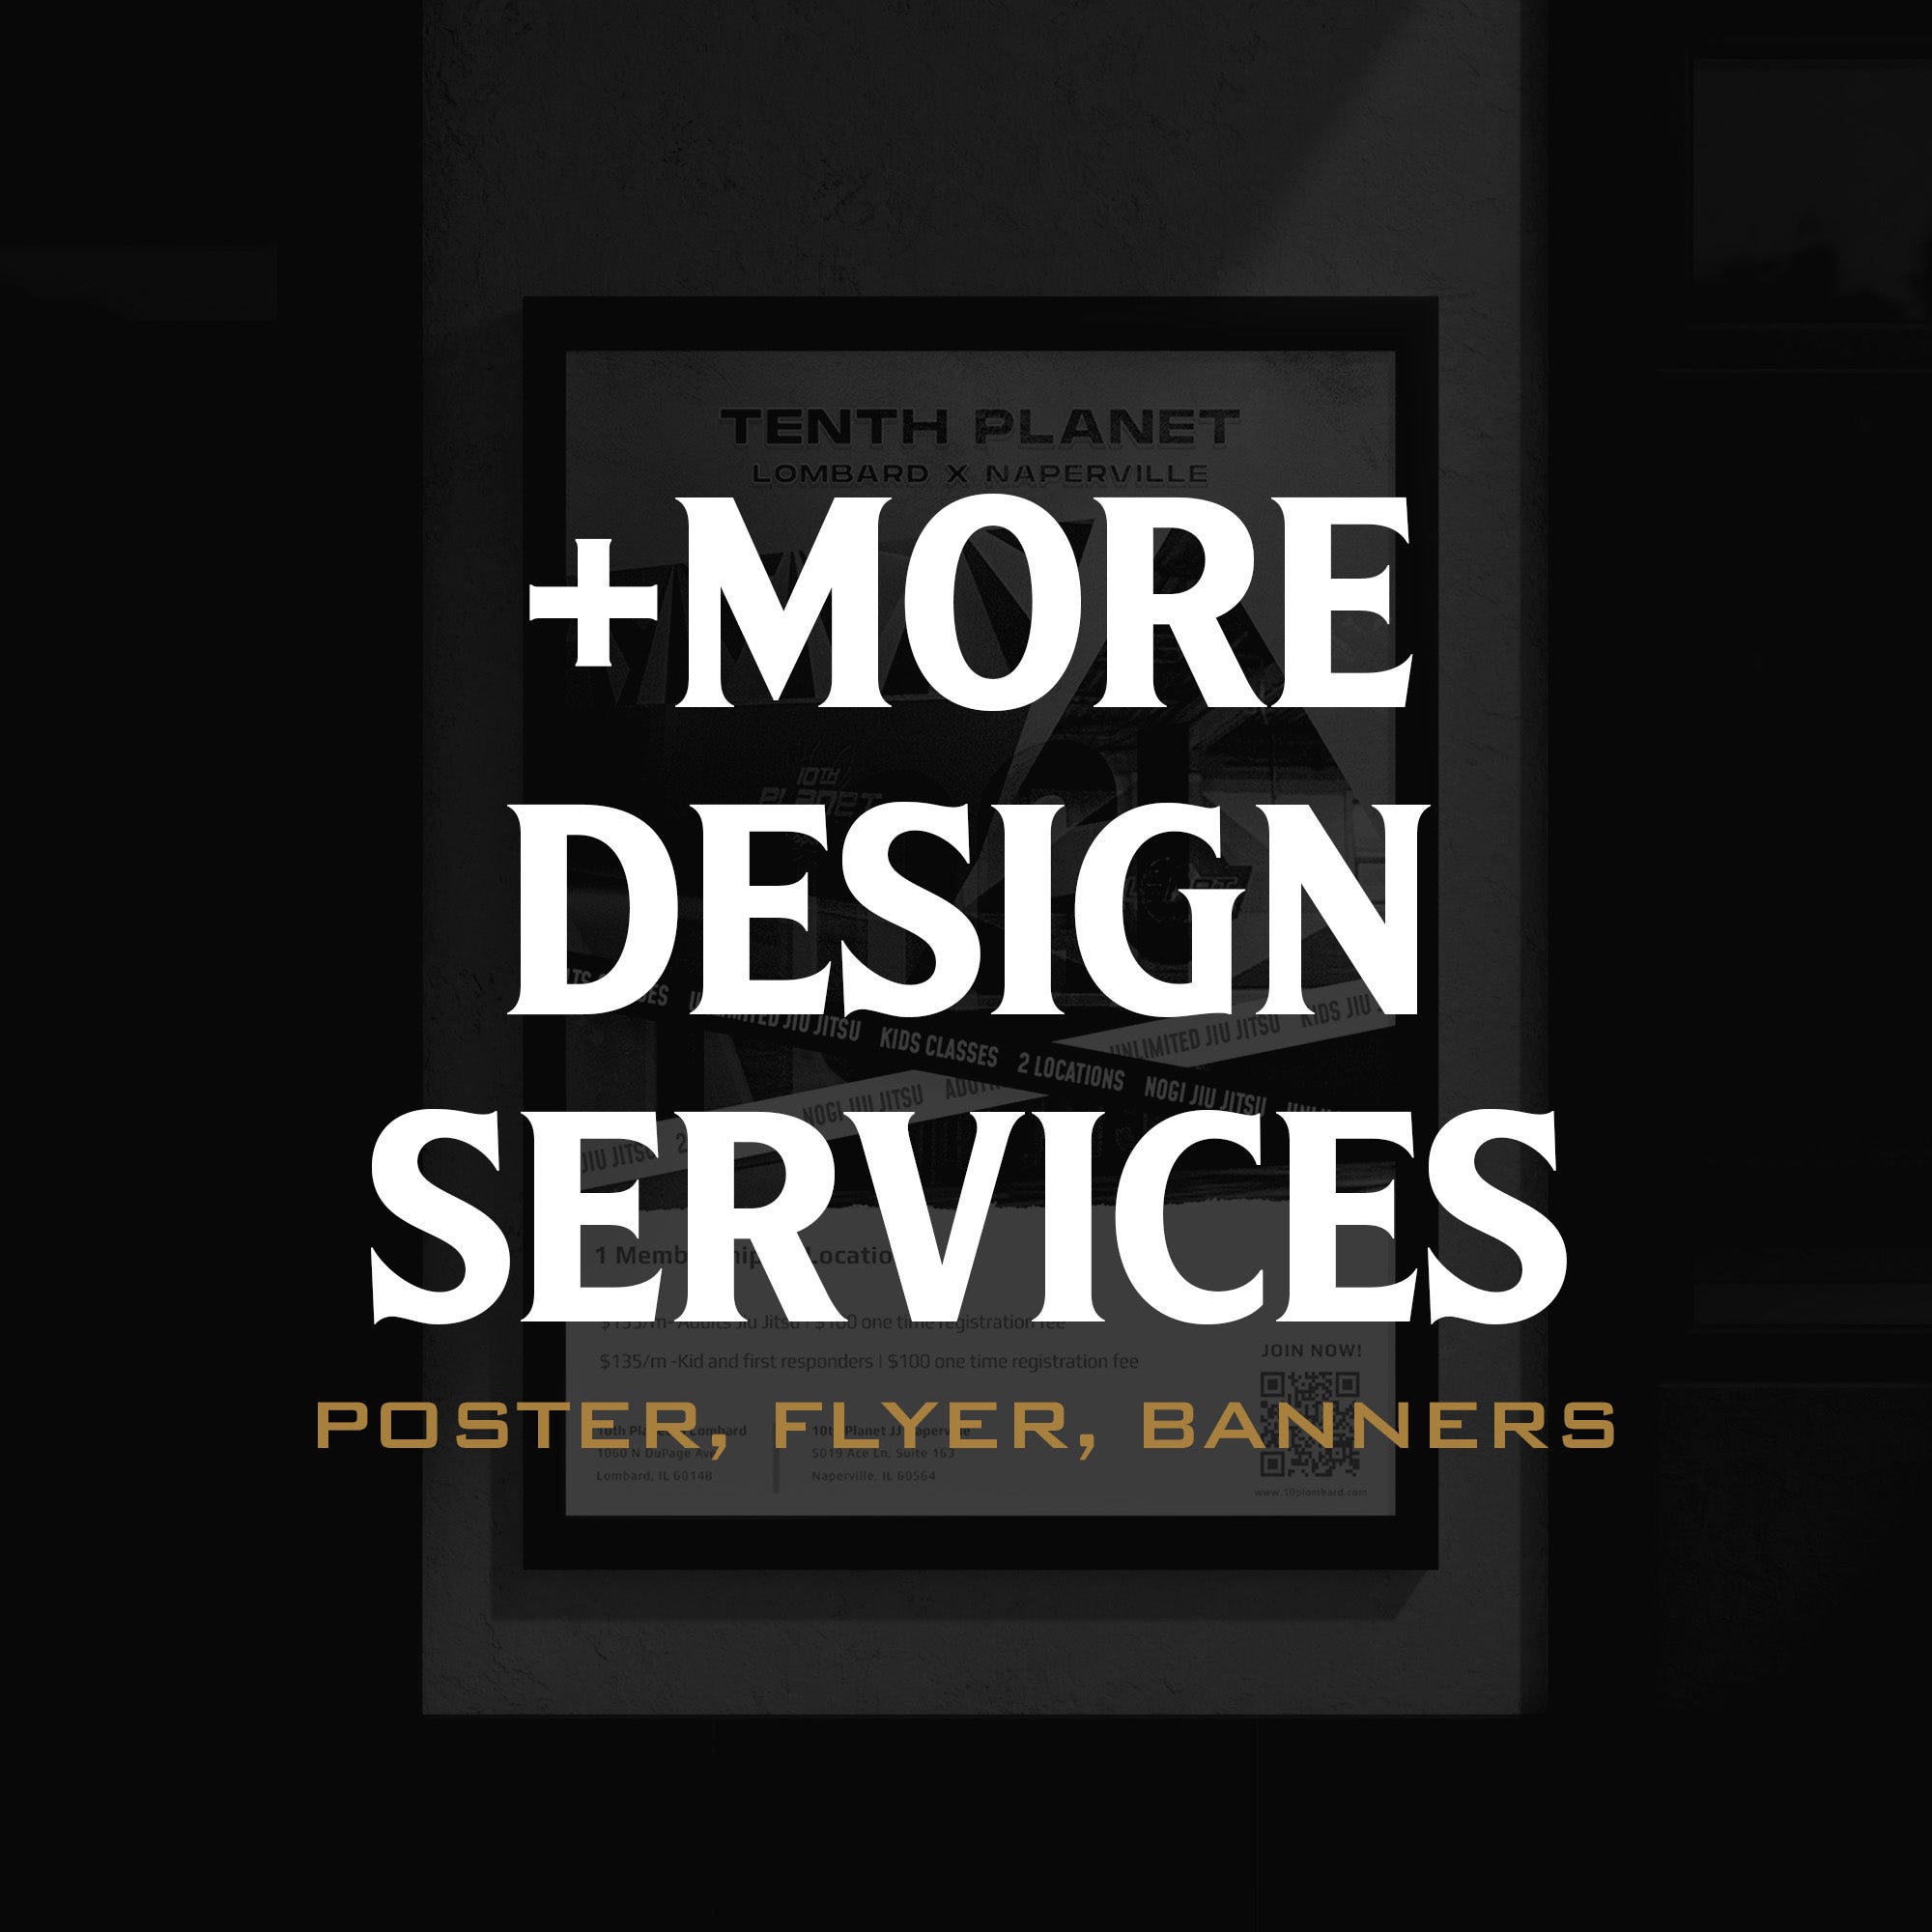 More Graphic Design Services (Posters, Flyers, Banners) by Eagr Ones